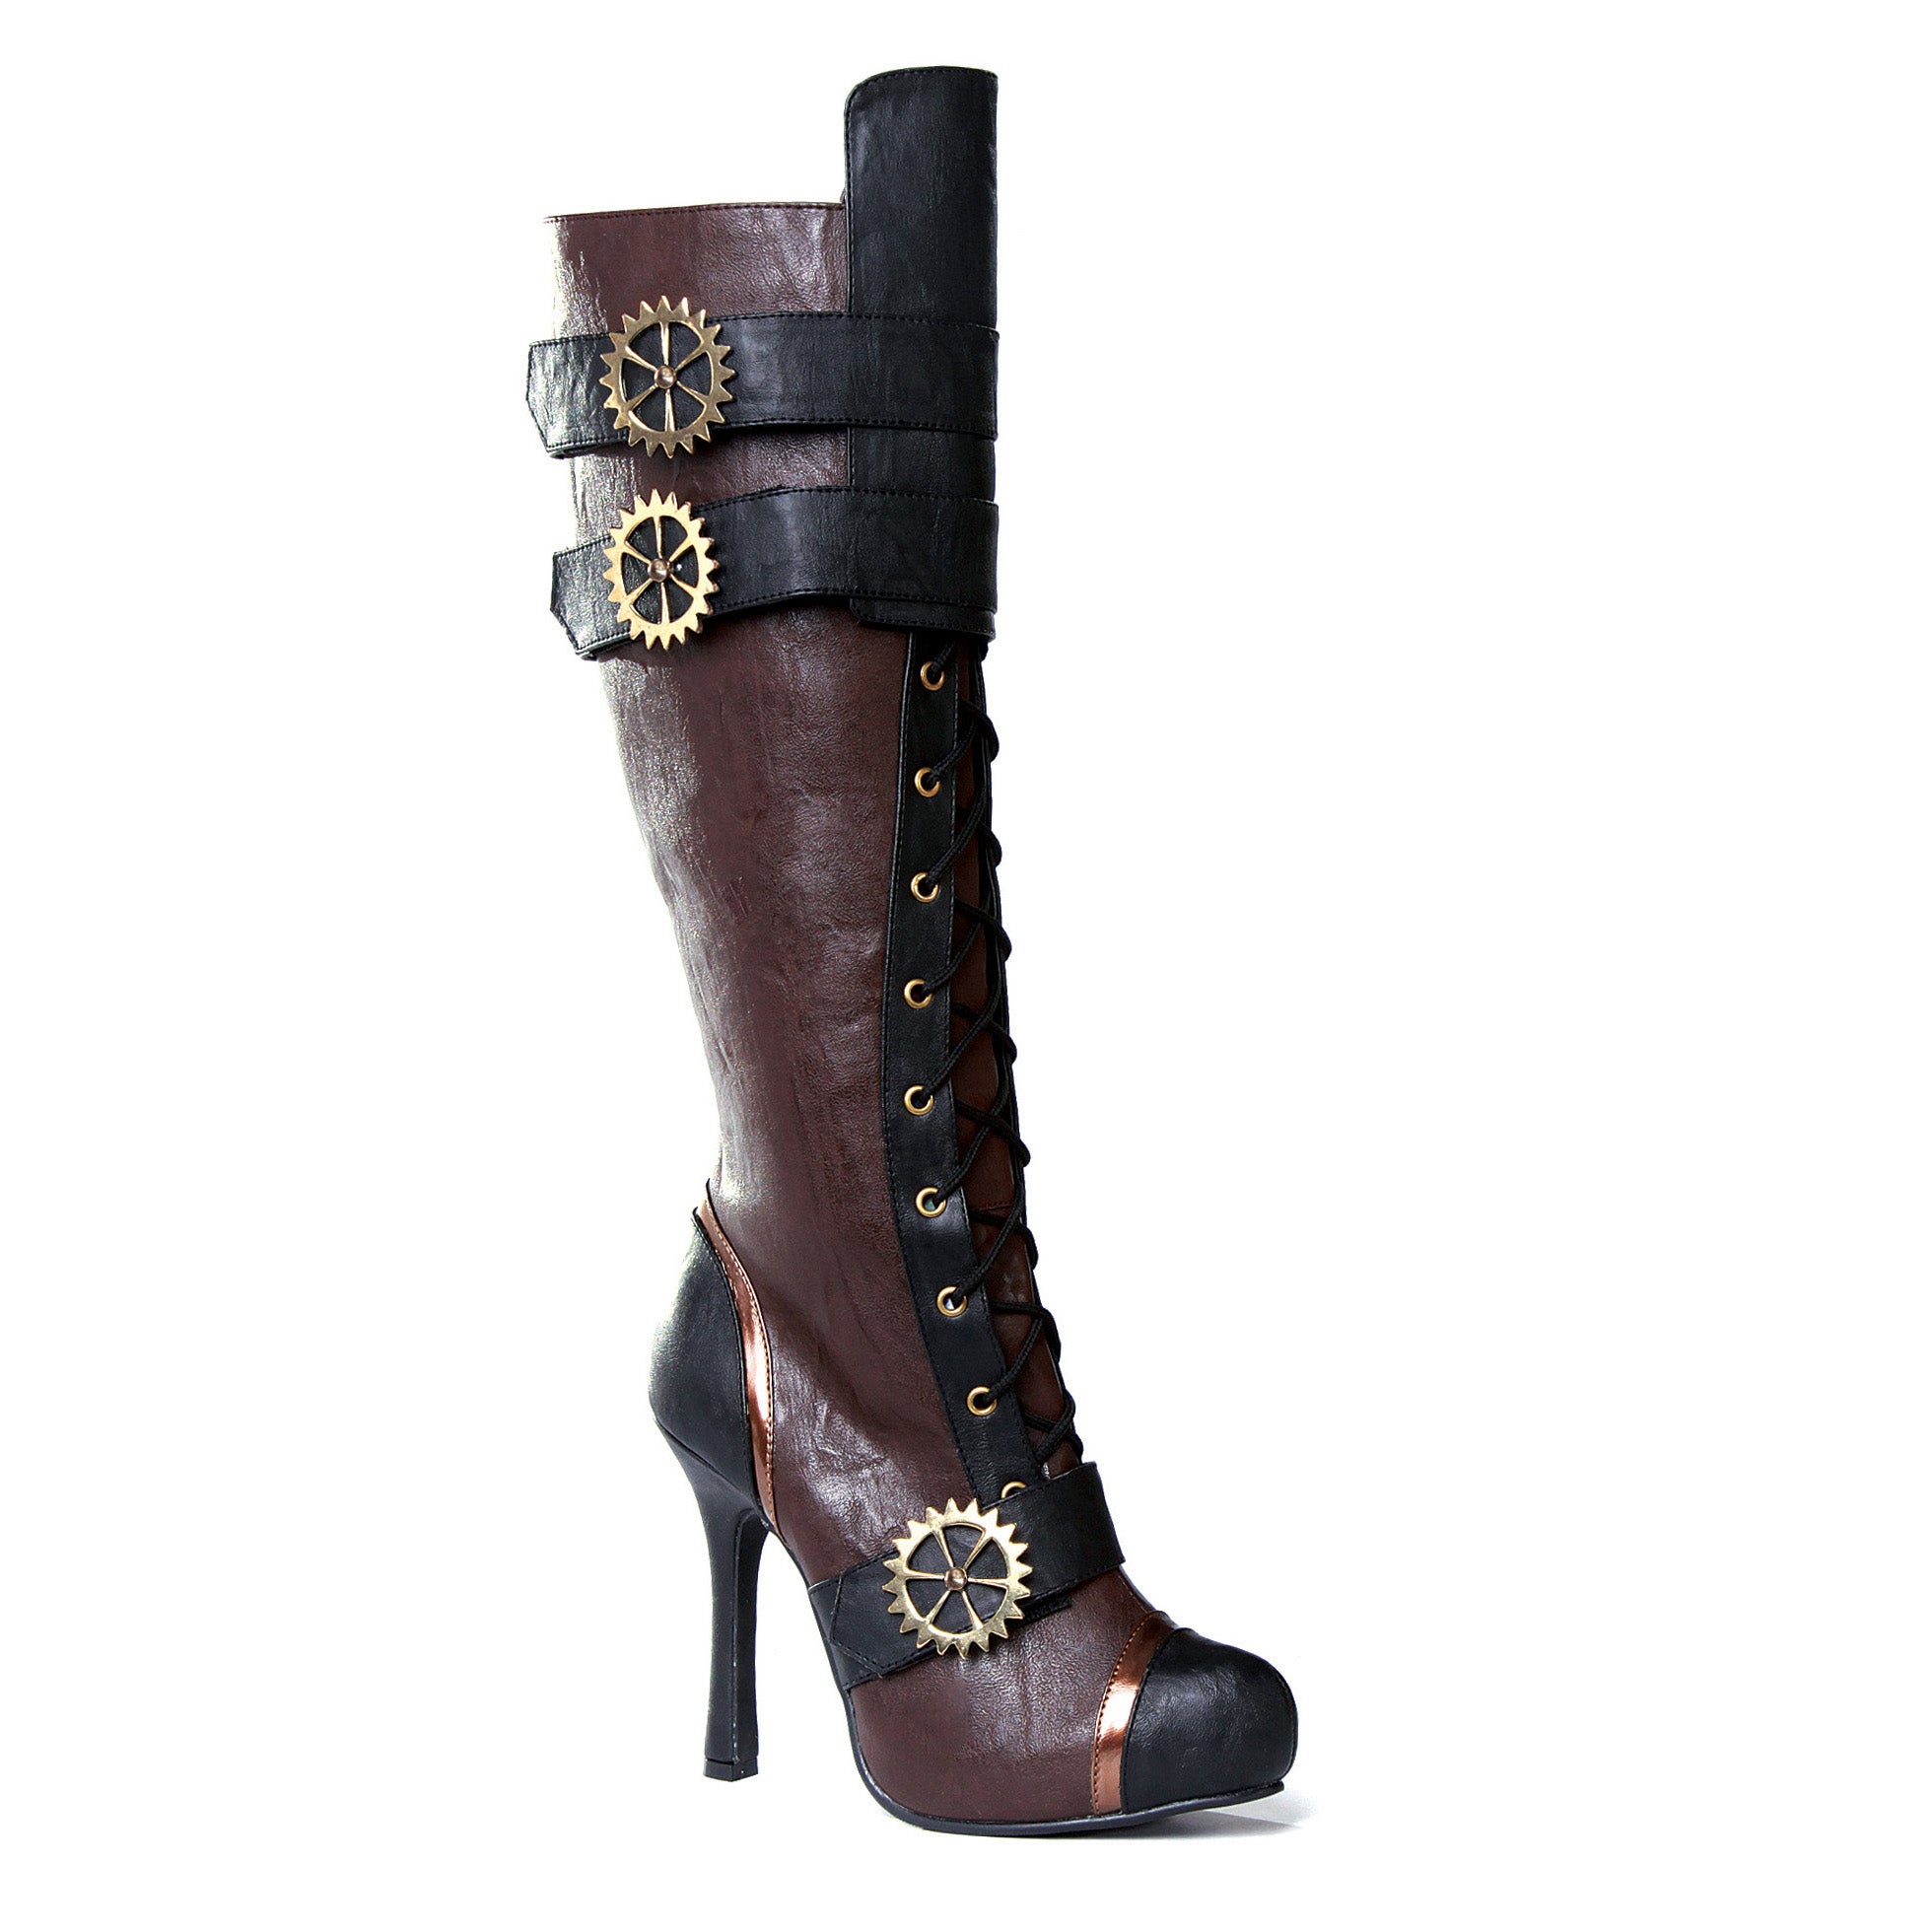 4 Knee High Steampunk Boot With Laces